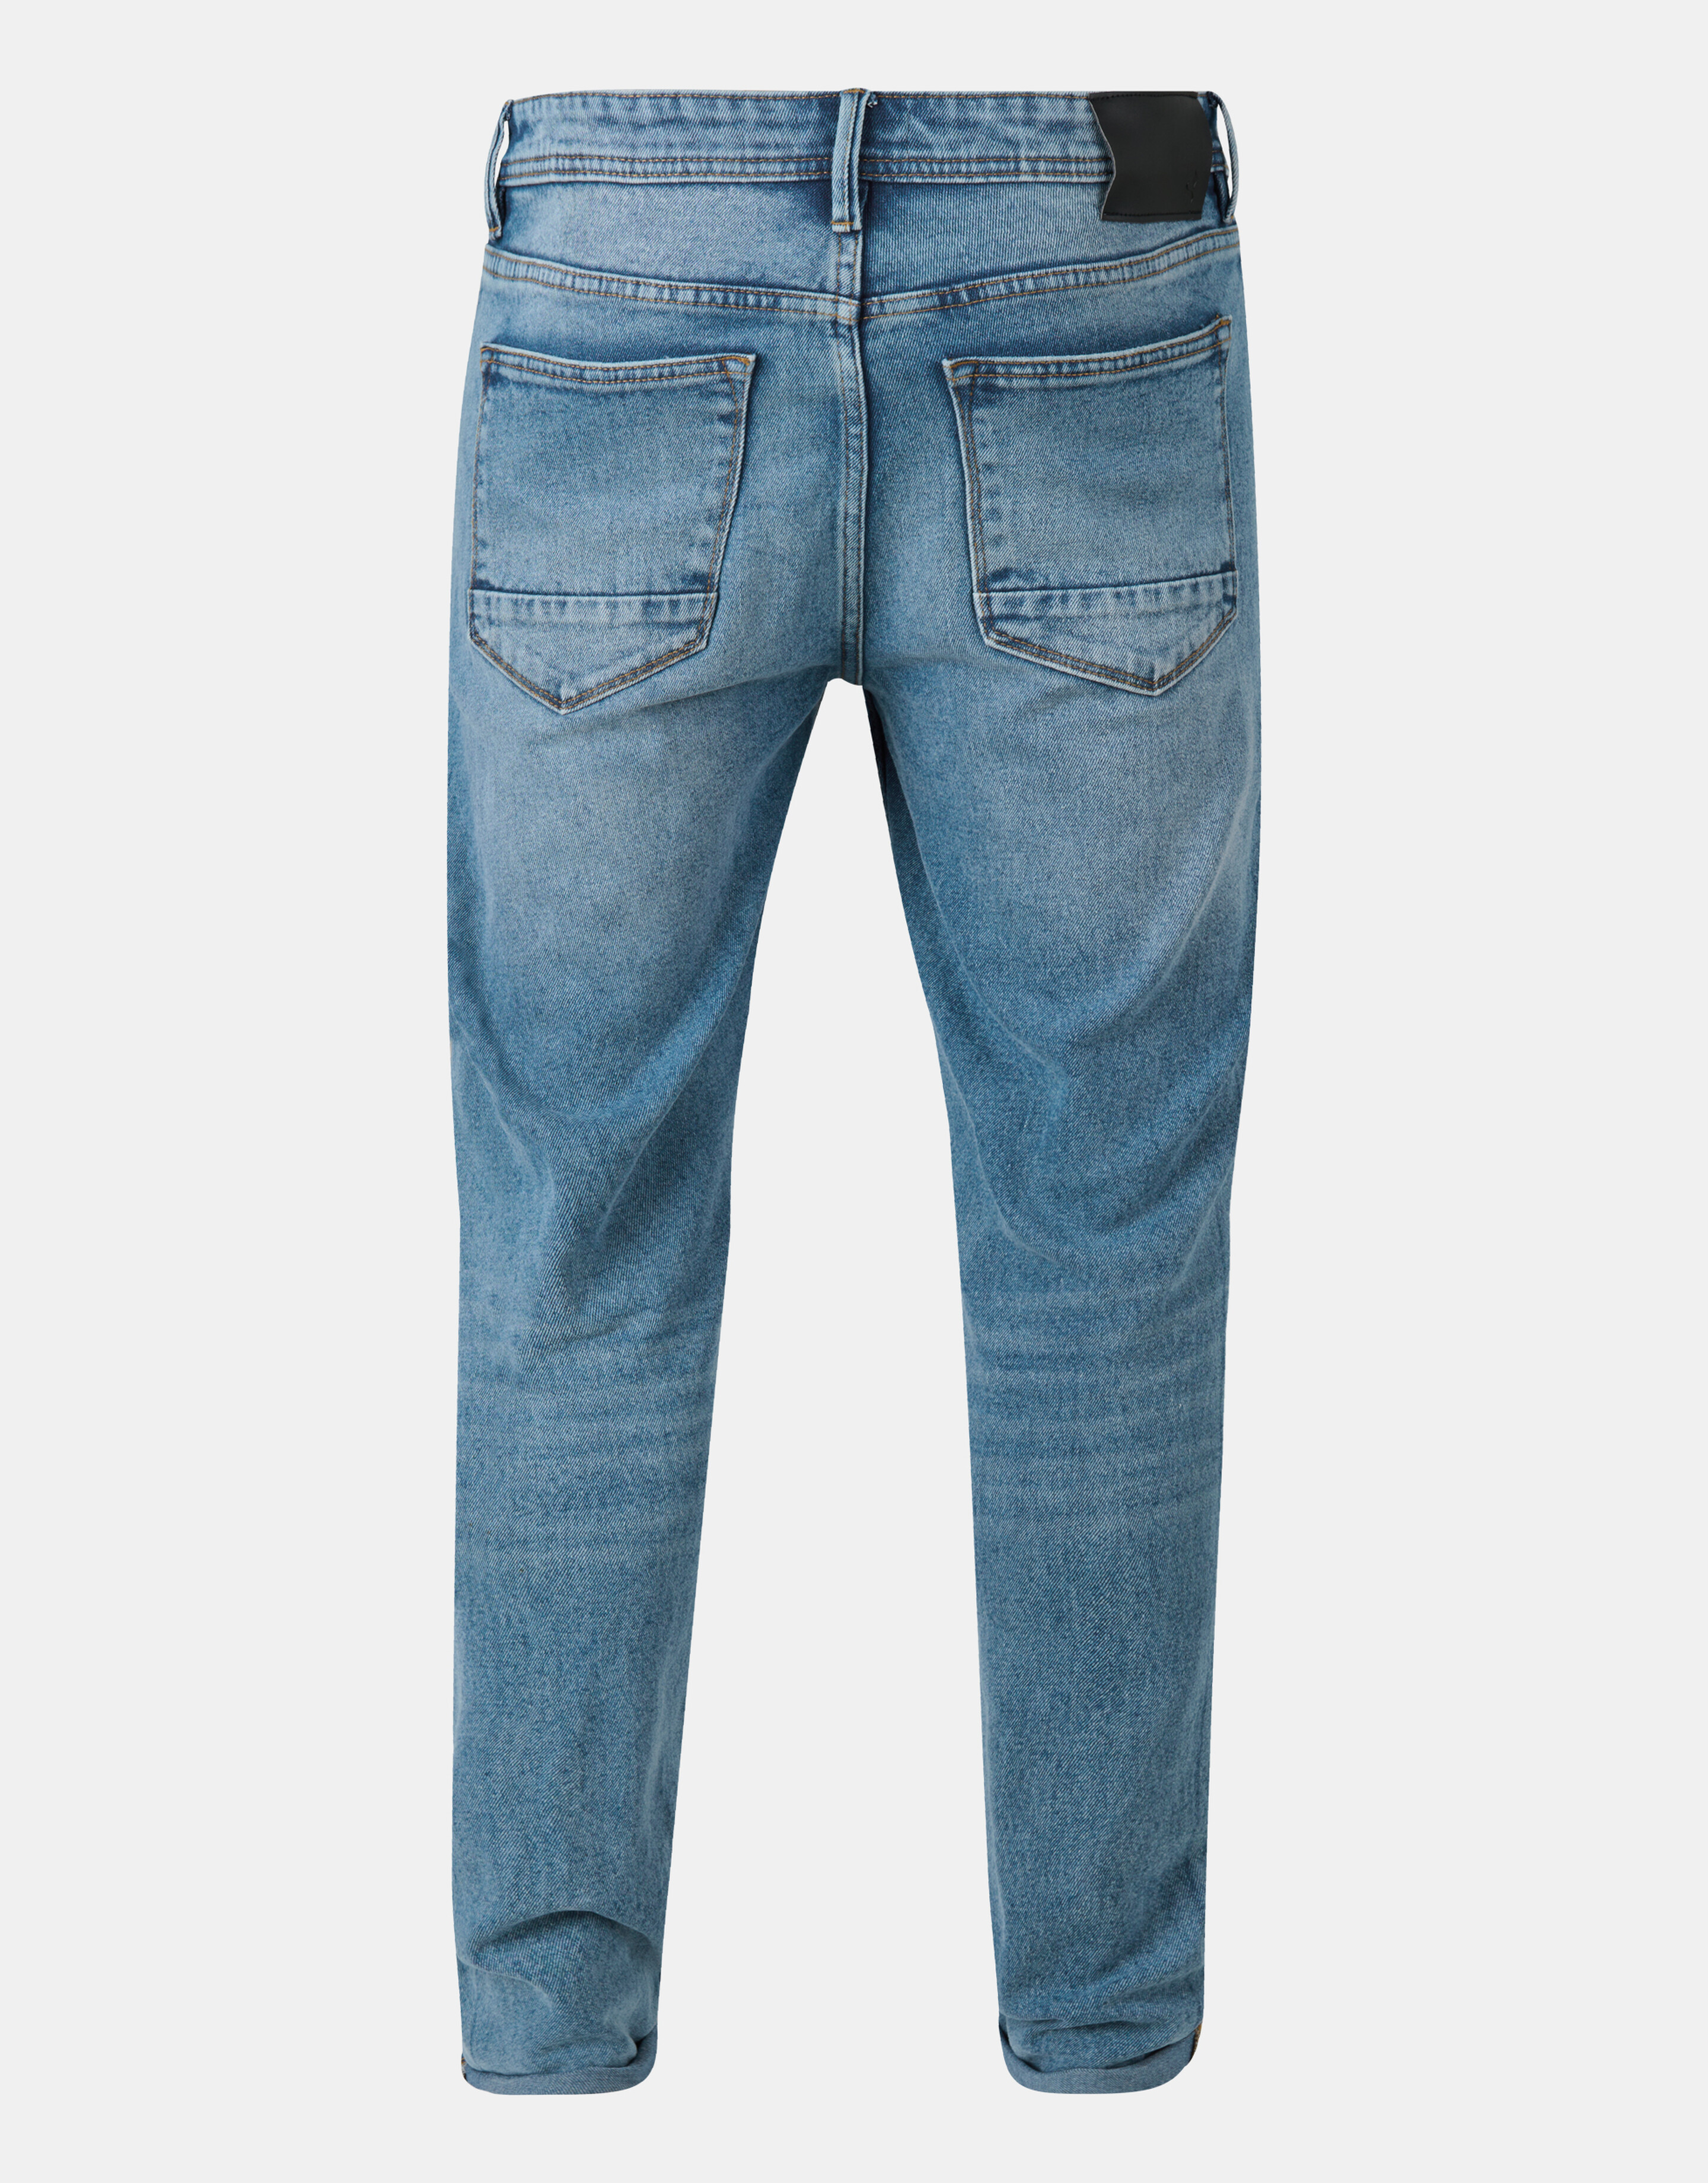 Repaired Mediumstone Tapered Jeans L32 SHOEBY MEN